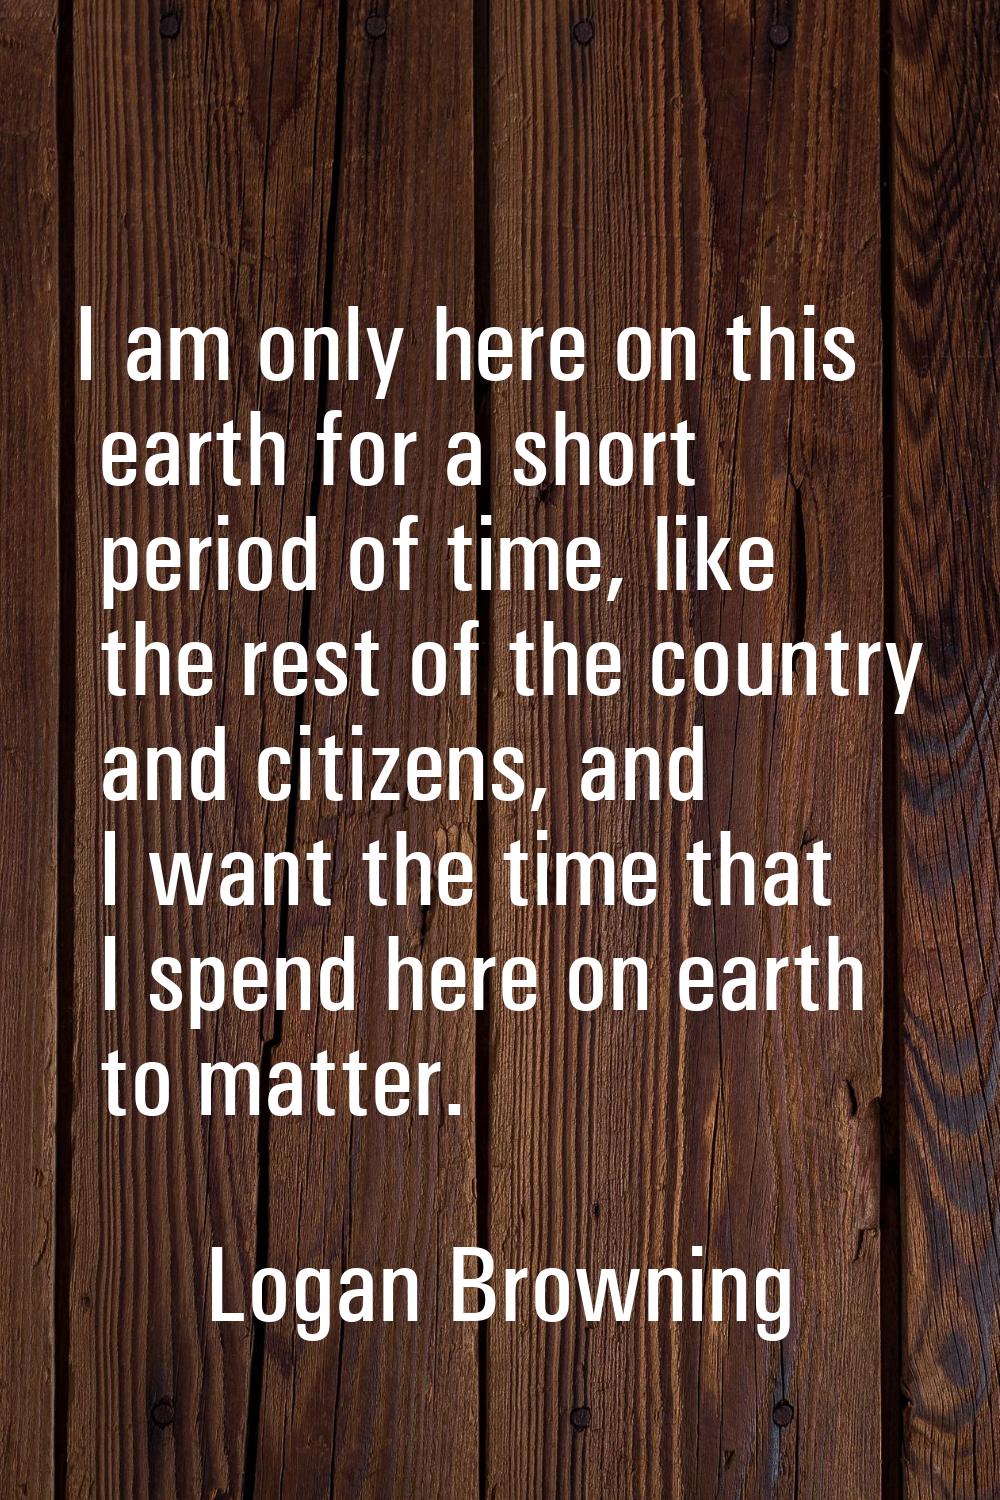 I am only here on this earth for a short period of time, like the rest of the country and citizens,